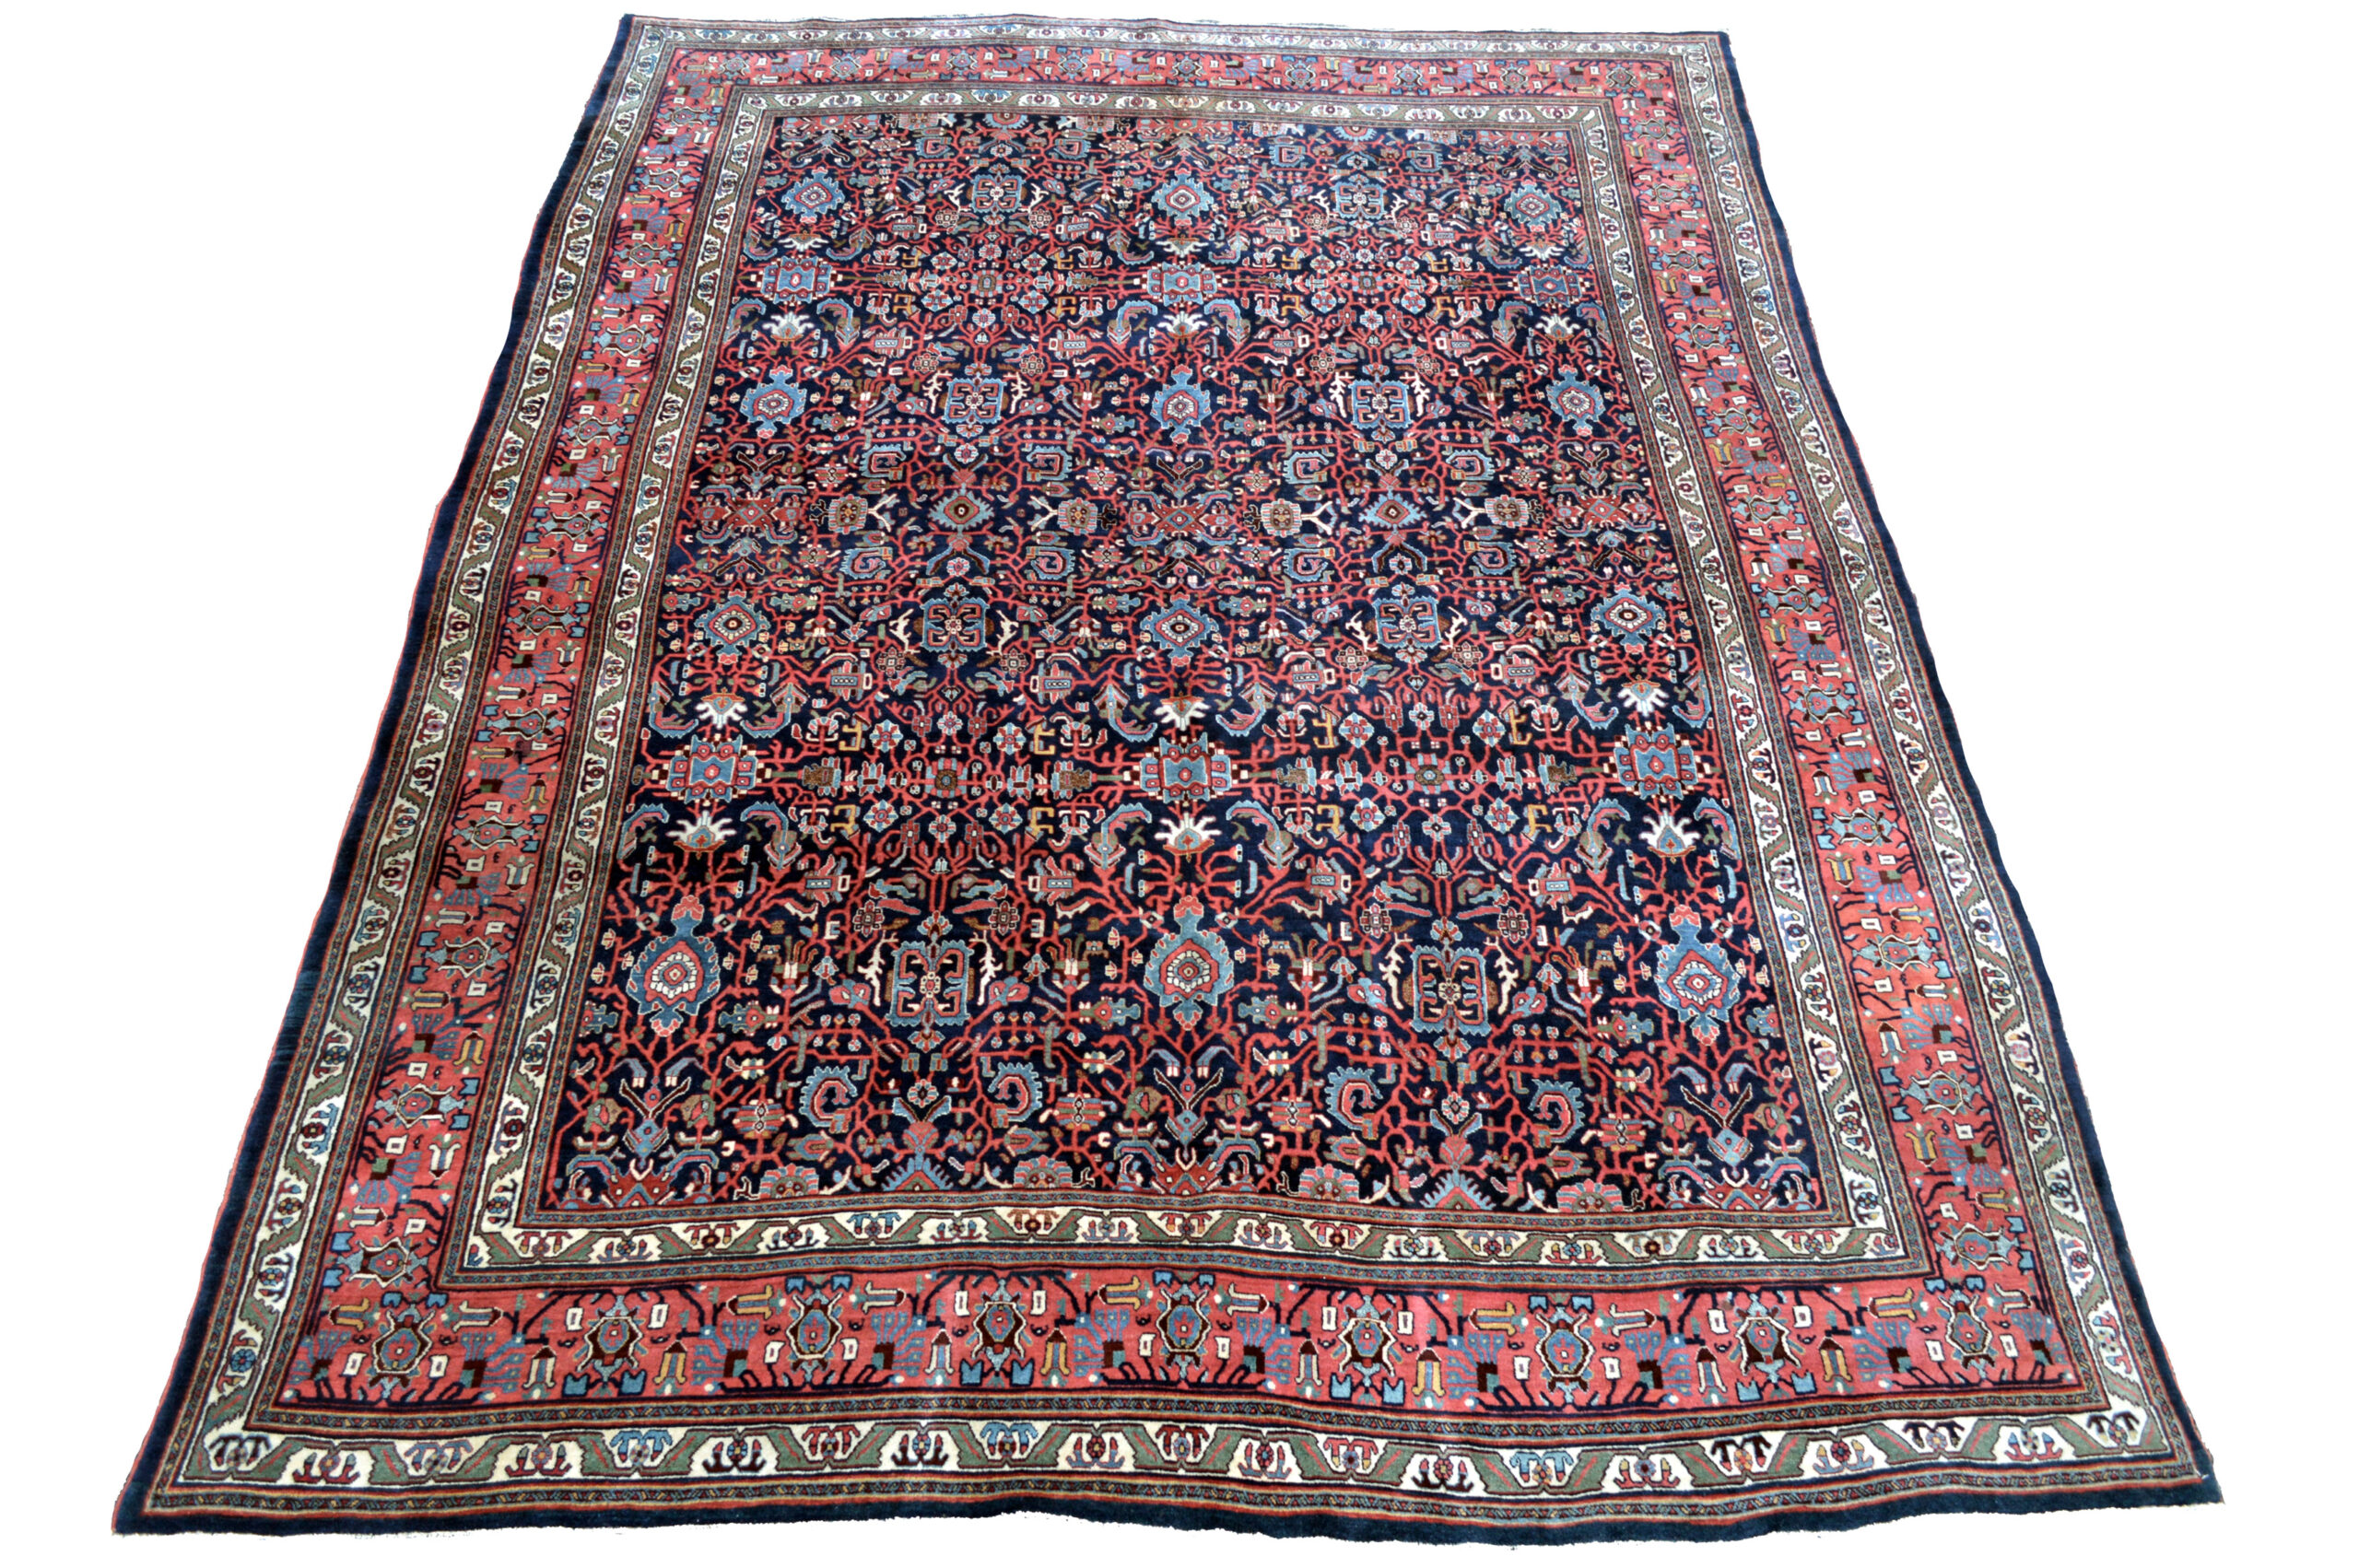 An antique Bidjar carpet with palmettes, vines, flowers and leaves on a navy blue field. A coral border with ivory and green guard borders frames the field, northwest Persia, circa 1915. Douglas Stock Gallery is one of America's leading specialist dealers in antique Persian Bidjar rugs and carpets and other antique Kurdish rugs including antique Senneh rugs and antique Kurdish nomadic and village rugs. Antique Oriental rugs Boston Beacon Hill, Boston Back Bay, Brookline, Newton, Weston, Belmont, Concord, Wellesley, Natick,MA area